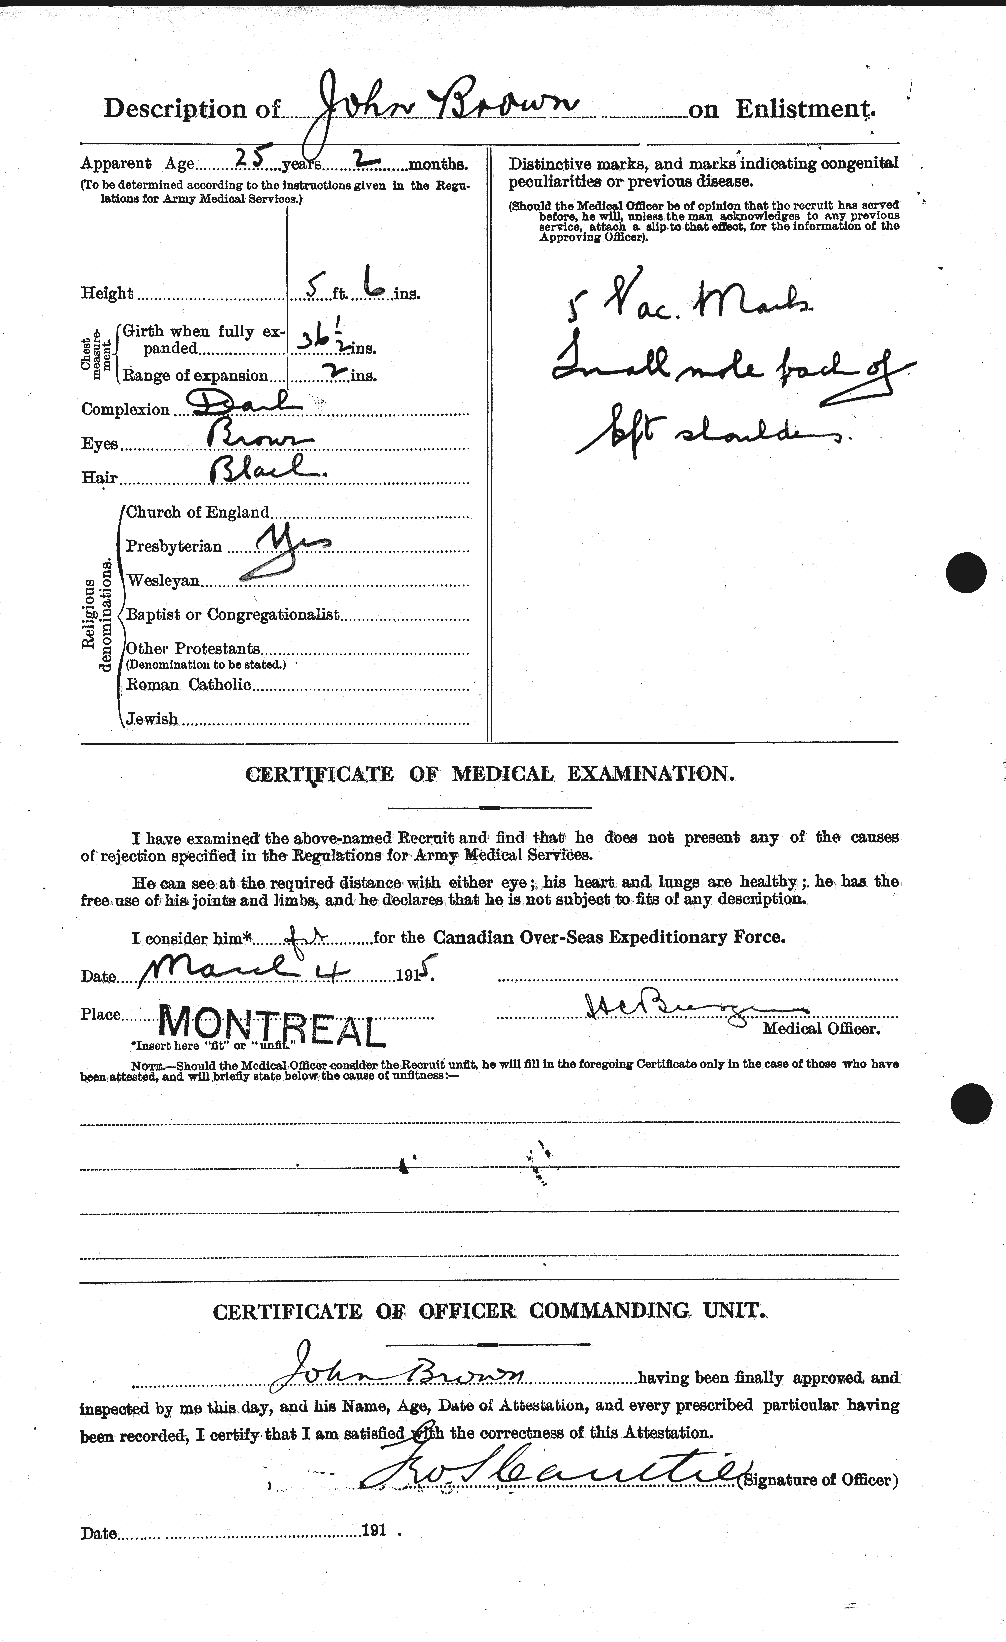 Personnel Records of the First World War - CEF 264524b